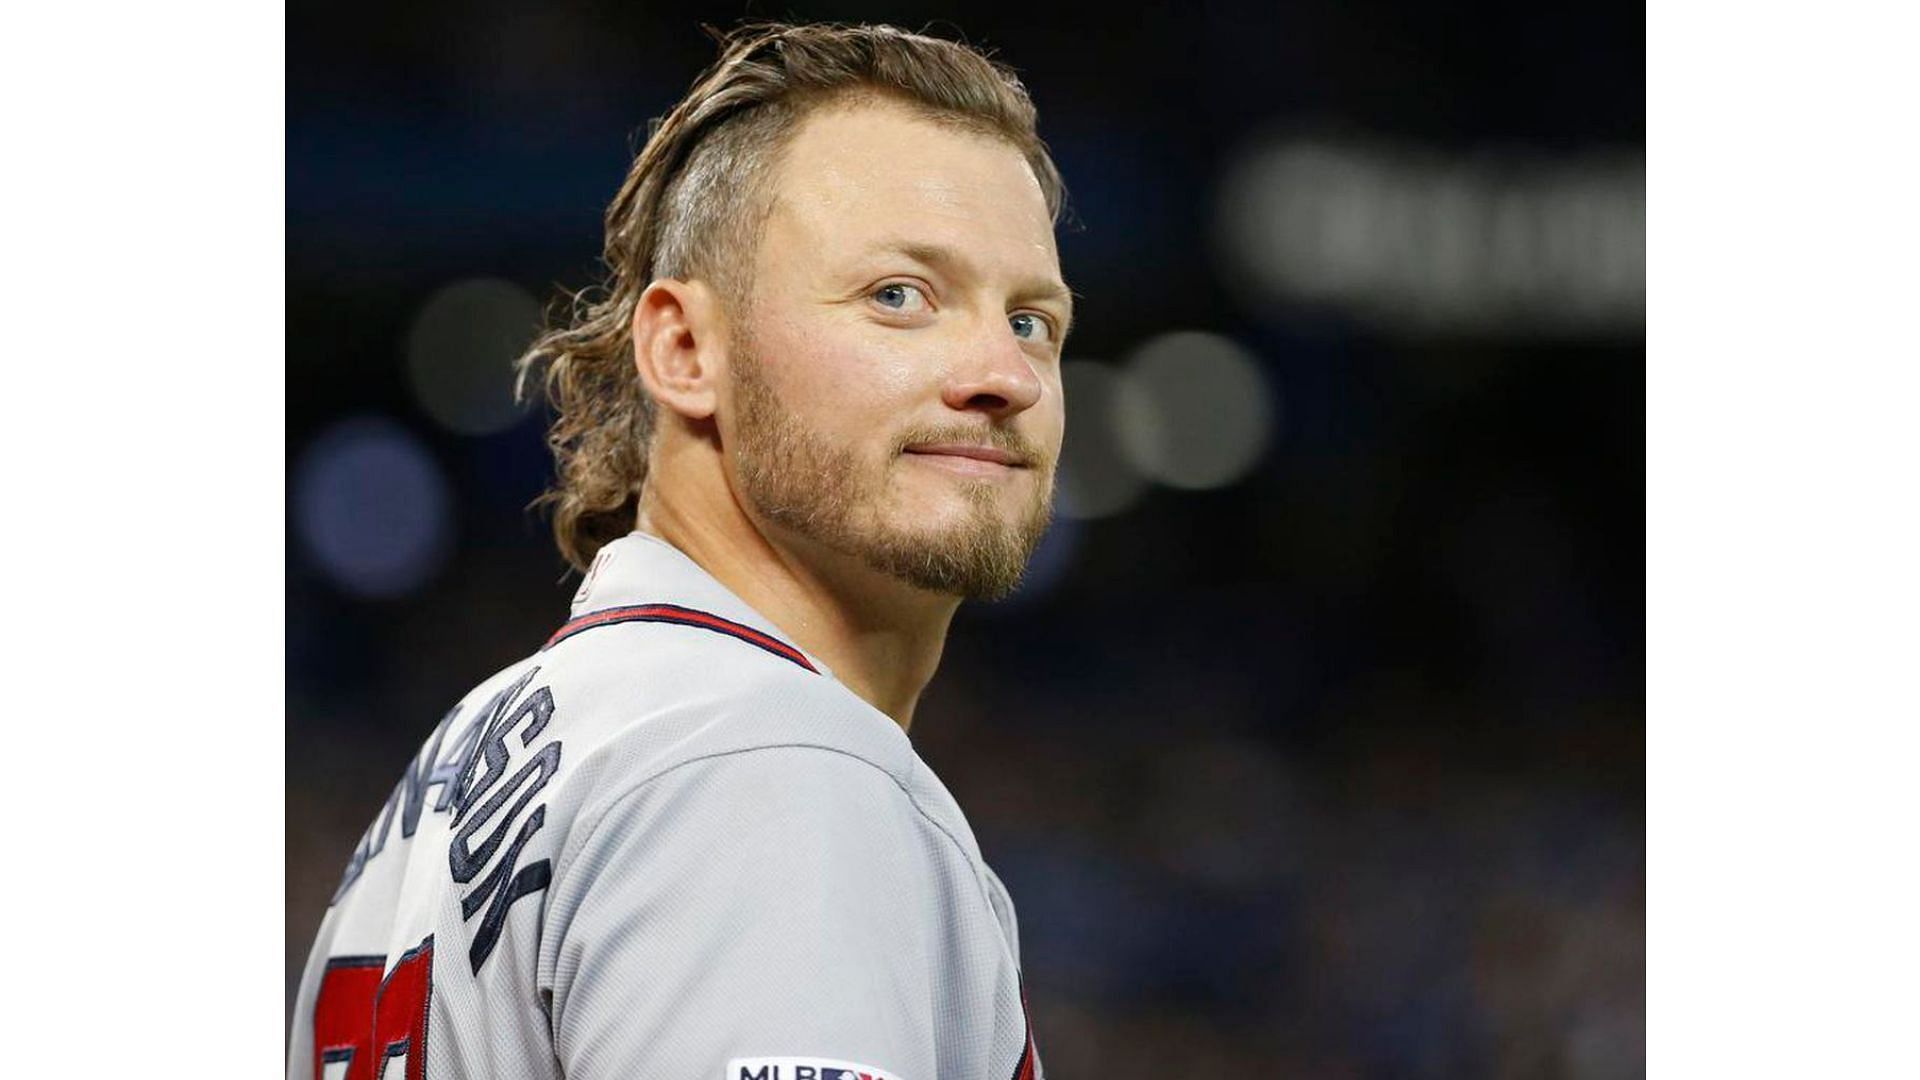 Josh Donaldson once landed in hot water over his unintentional